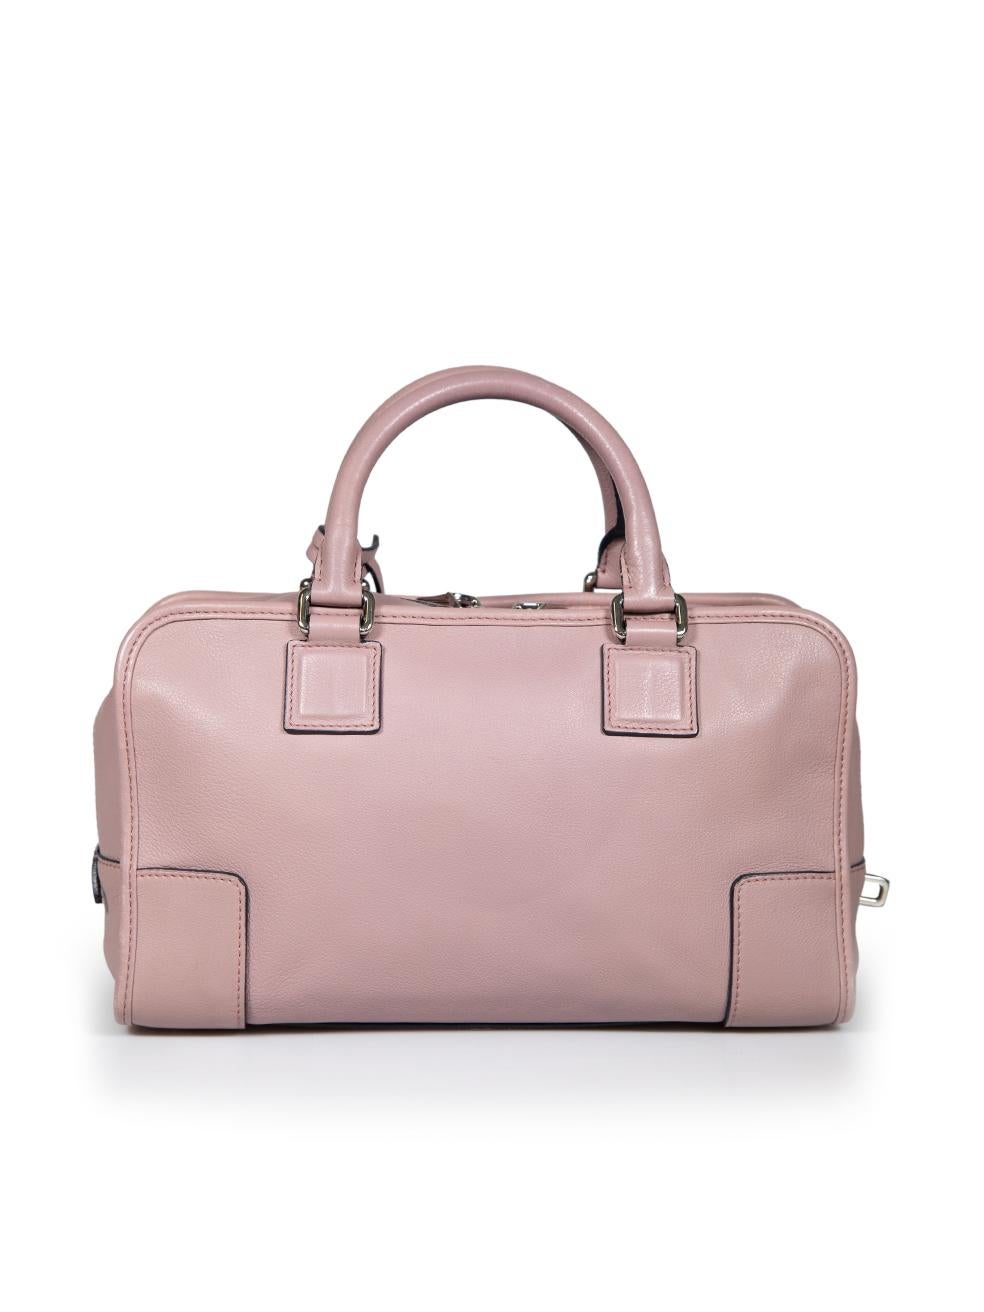 Loewe Mauve Leather Amazona 28 Bag In Good Condition For Sale In London, GB